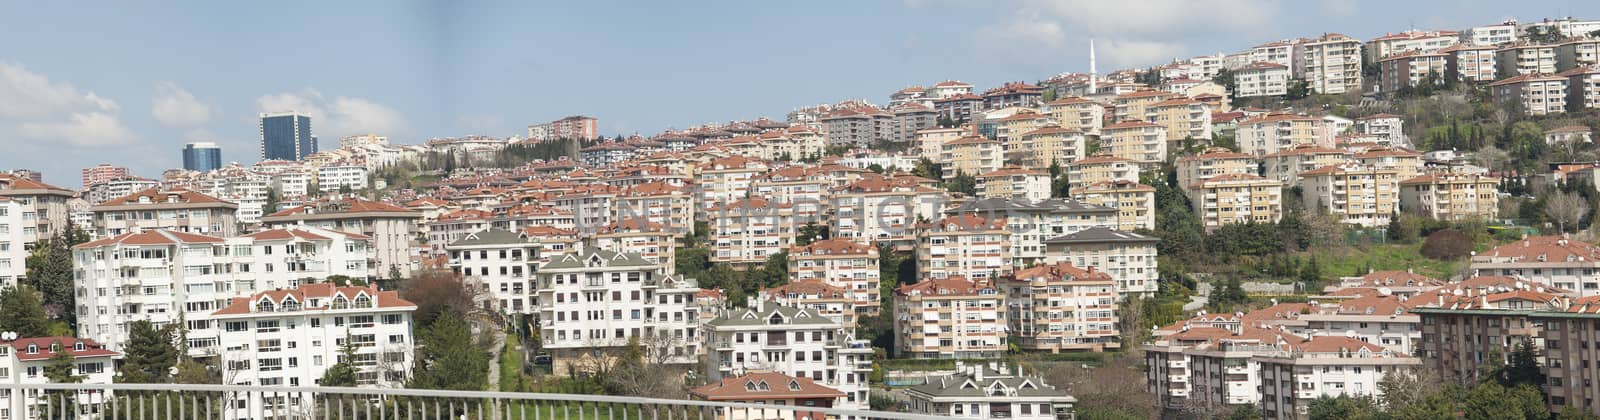 Panoramic view over a residential housing district on hillside in city